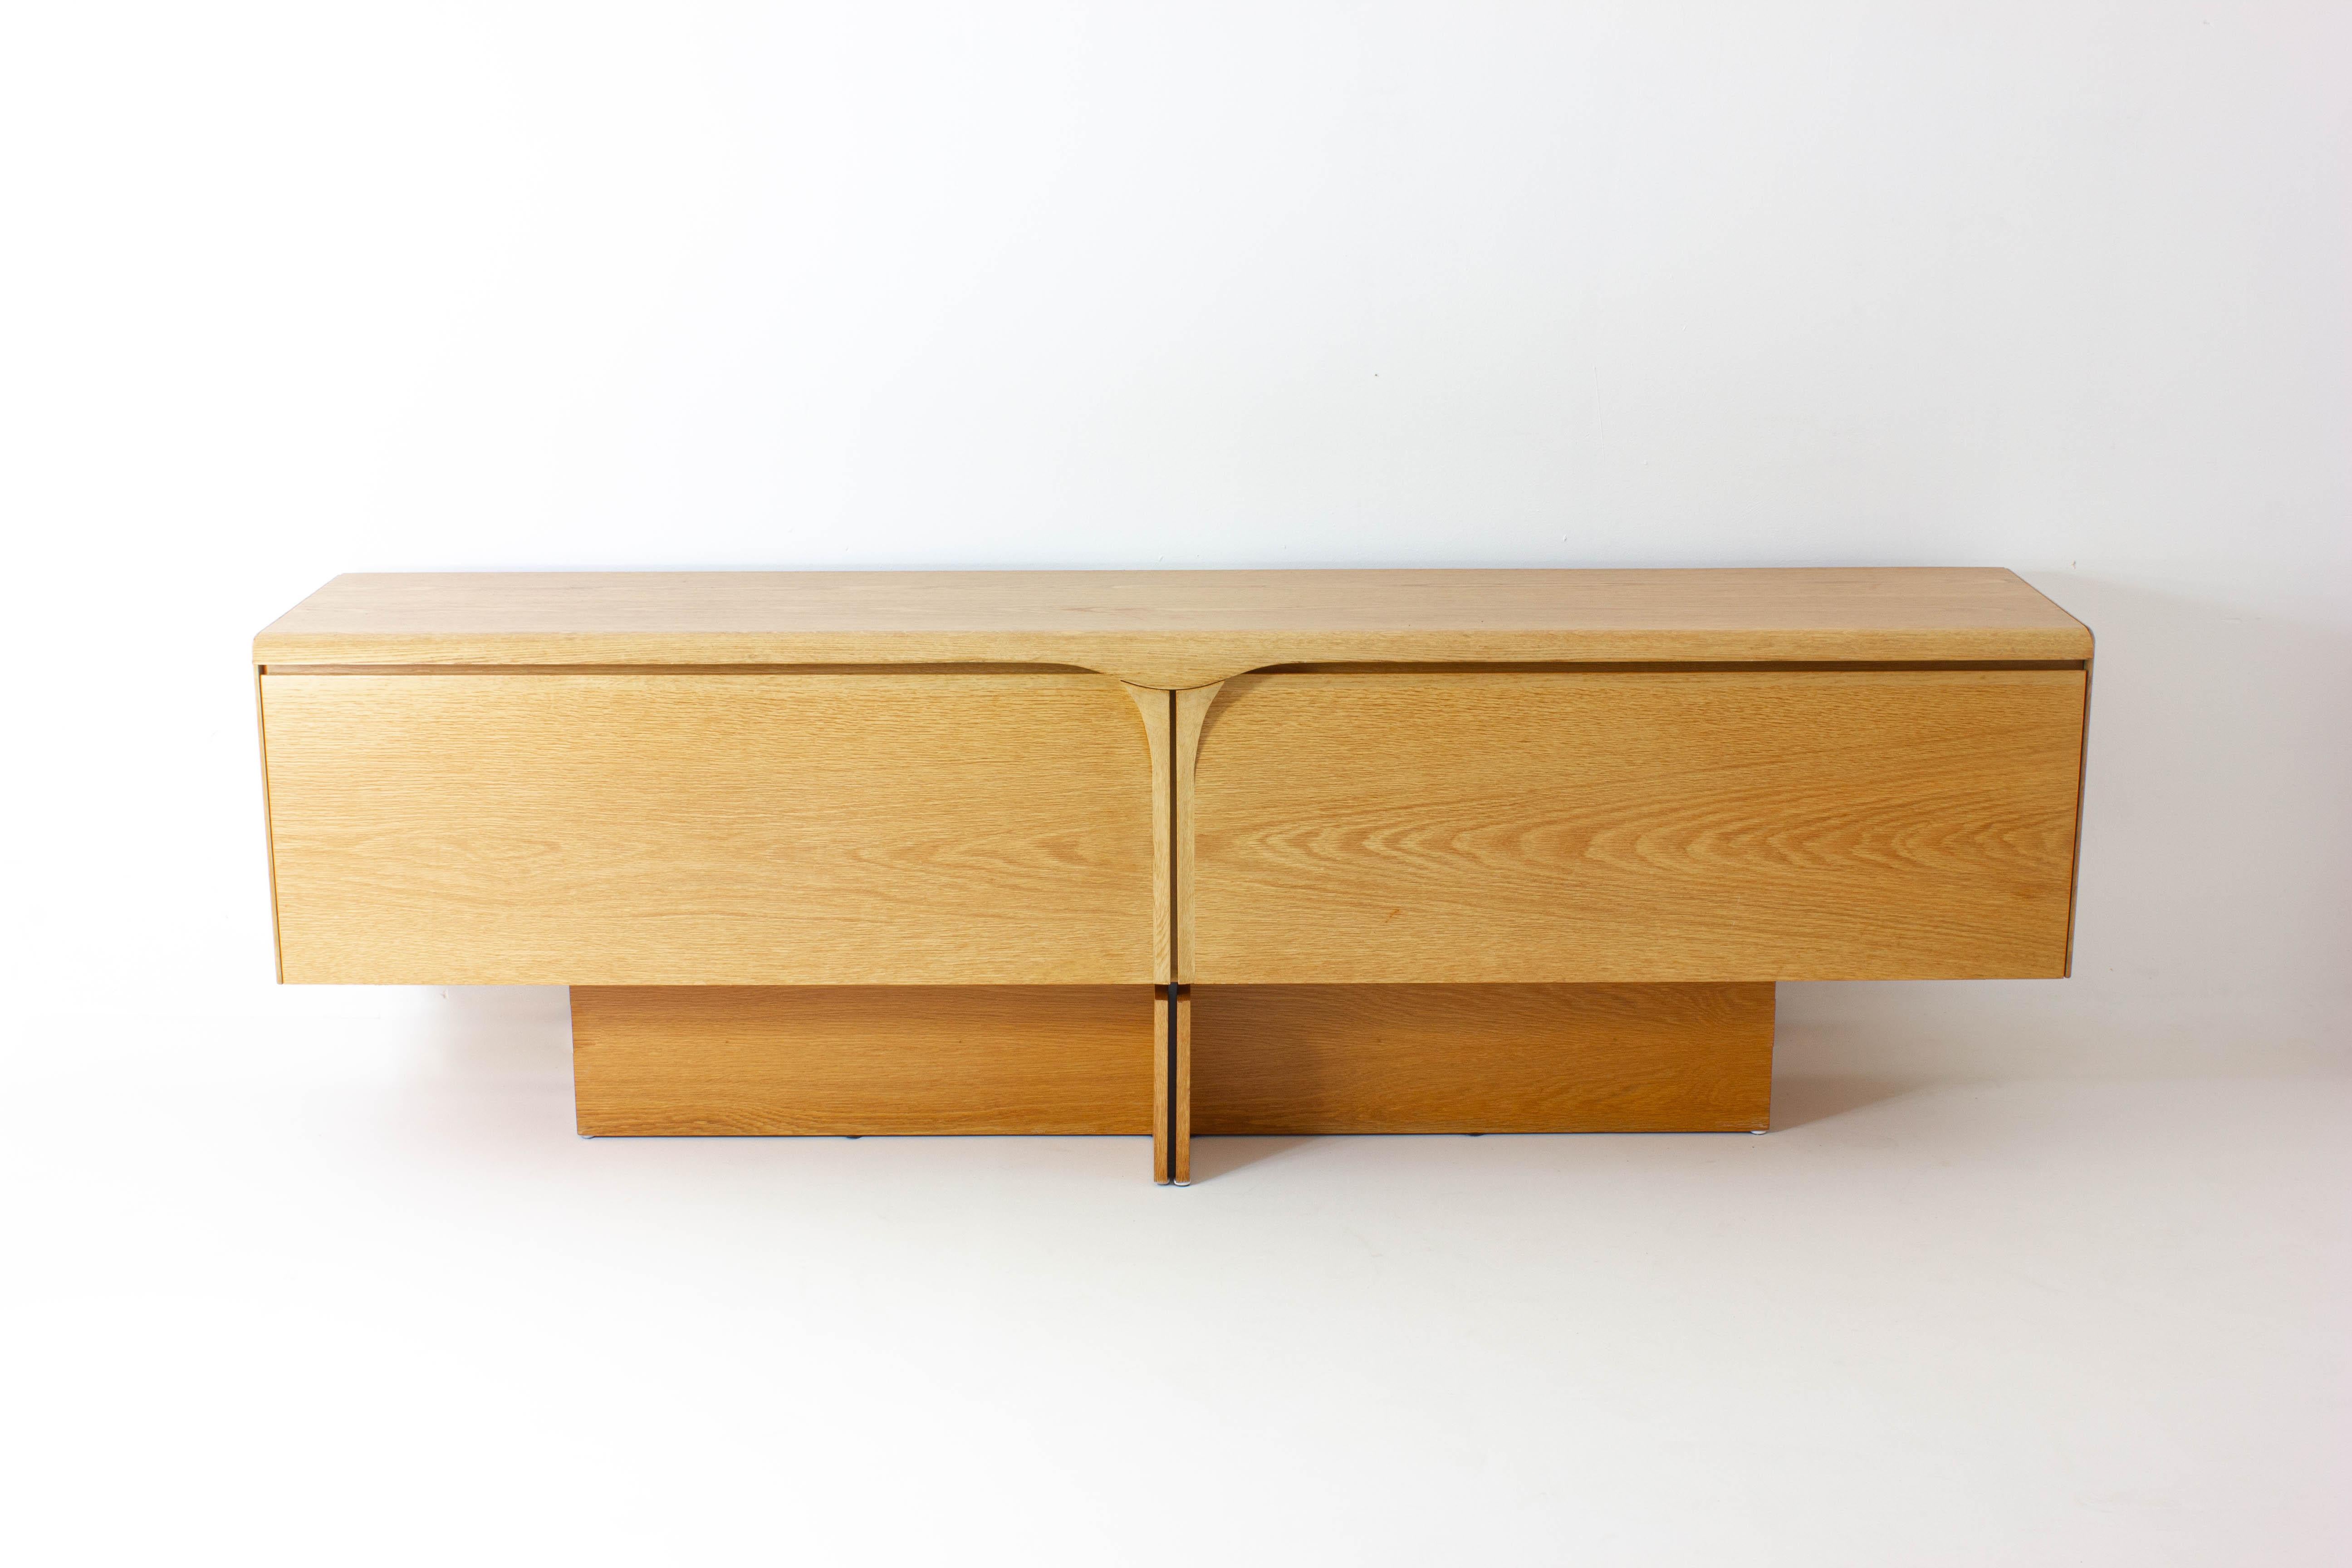 Introducing this stunning 1970s sideboard in oak by the renowned Belgian furniture maker Van Den Berghe-Pauvers. Crafted with precision and expertise, this exquisite piece will add a touch of sophistication and style to any home.

Boasting clean